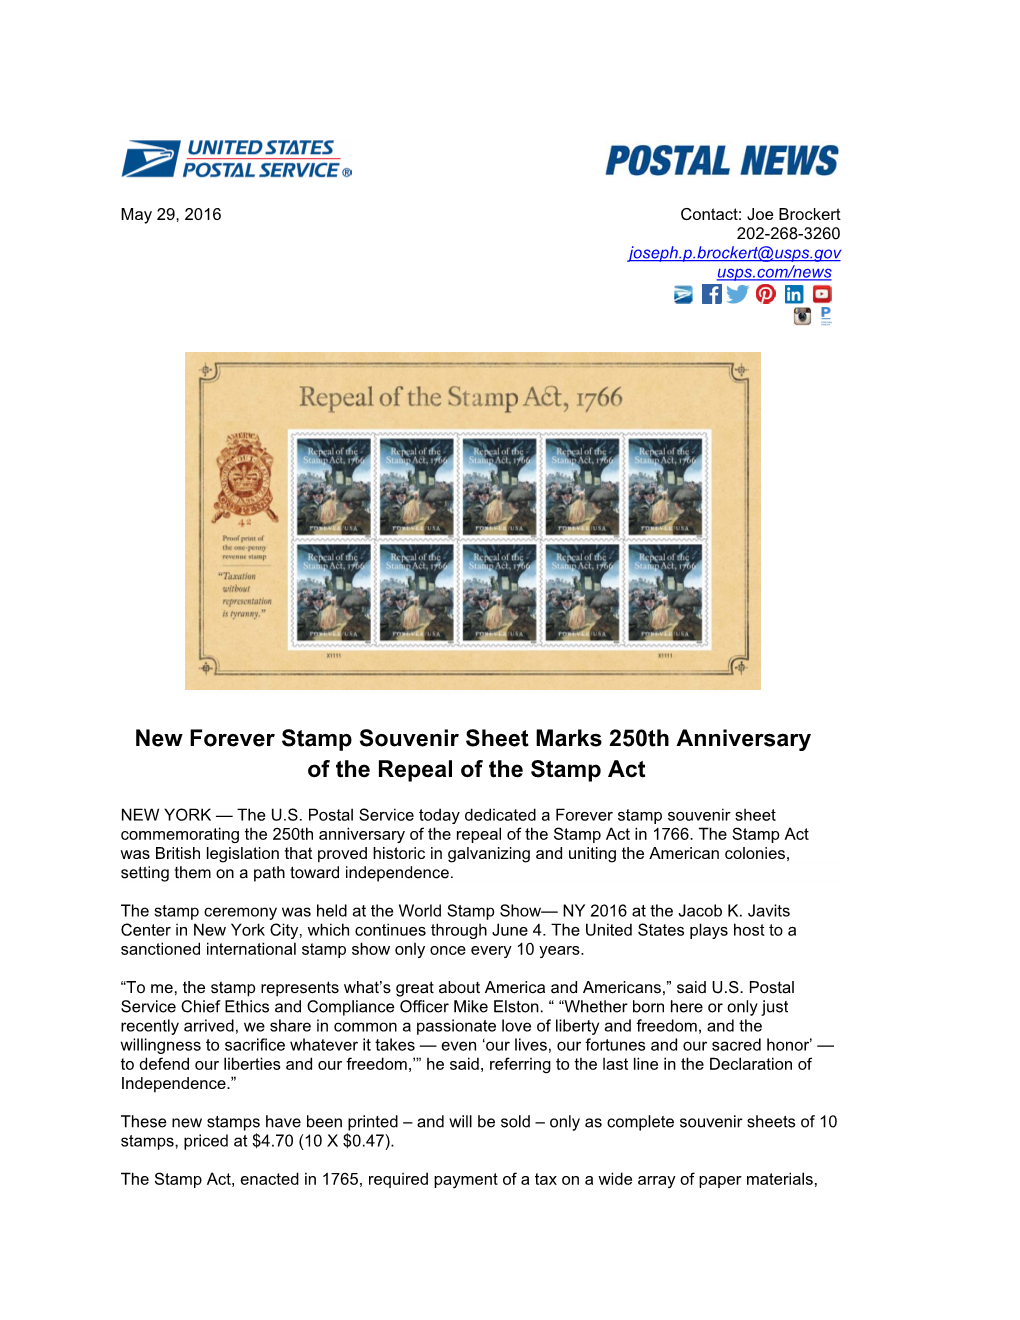 New Forever Stamp Souvenir Sheet Marks 250Th Anniversary of the Repeal of the Stamp Act